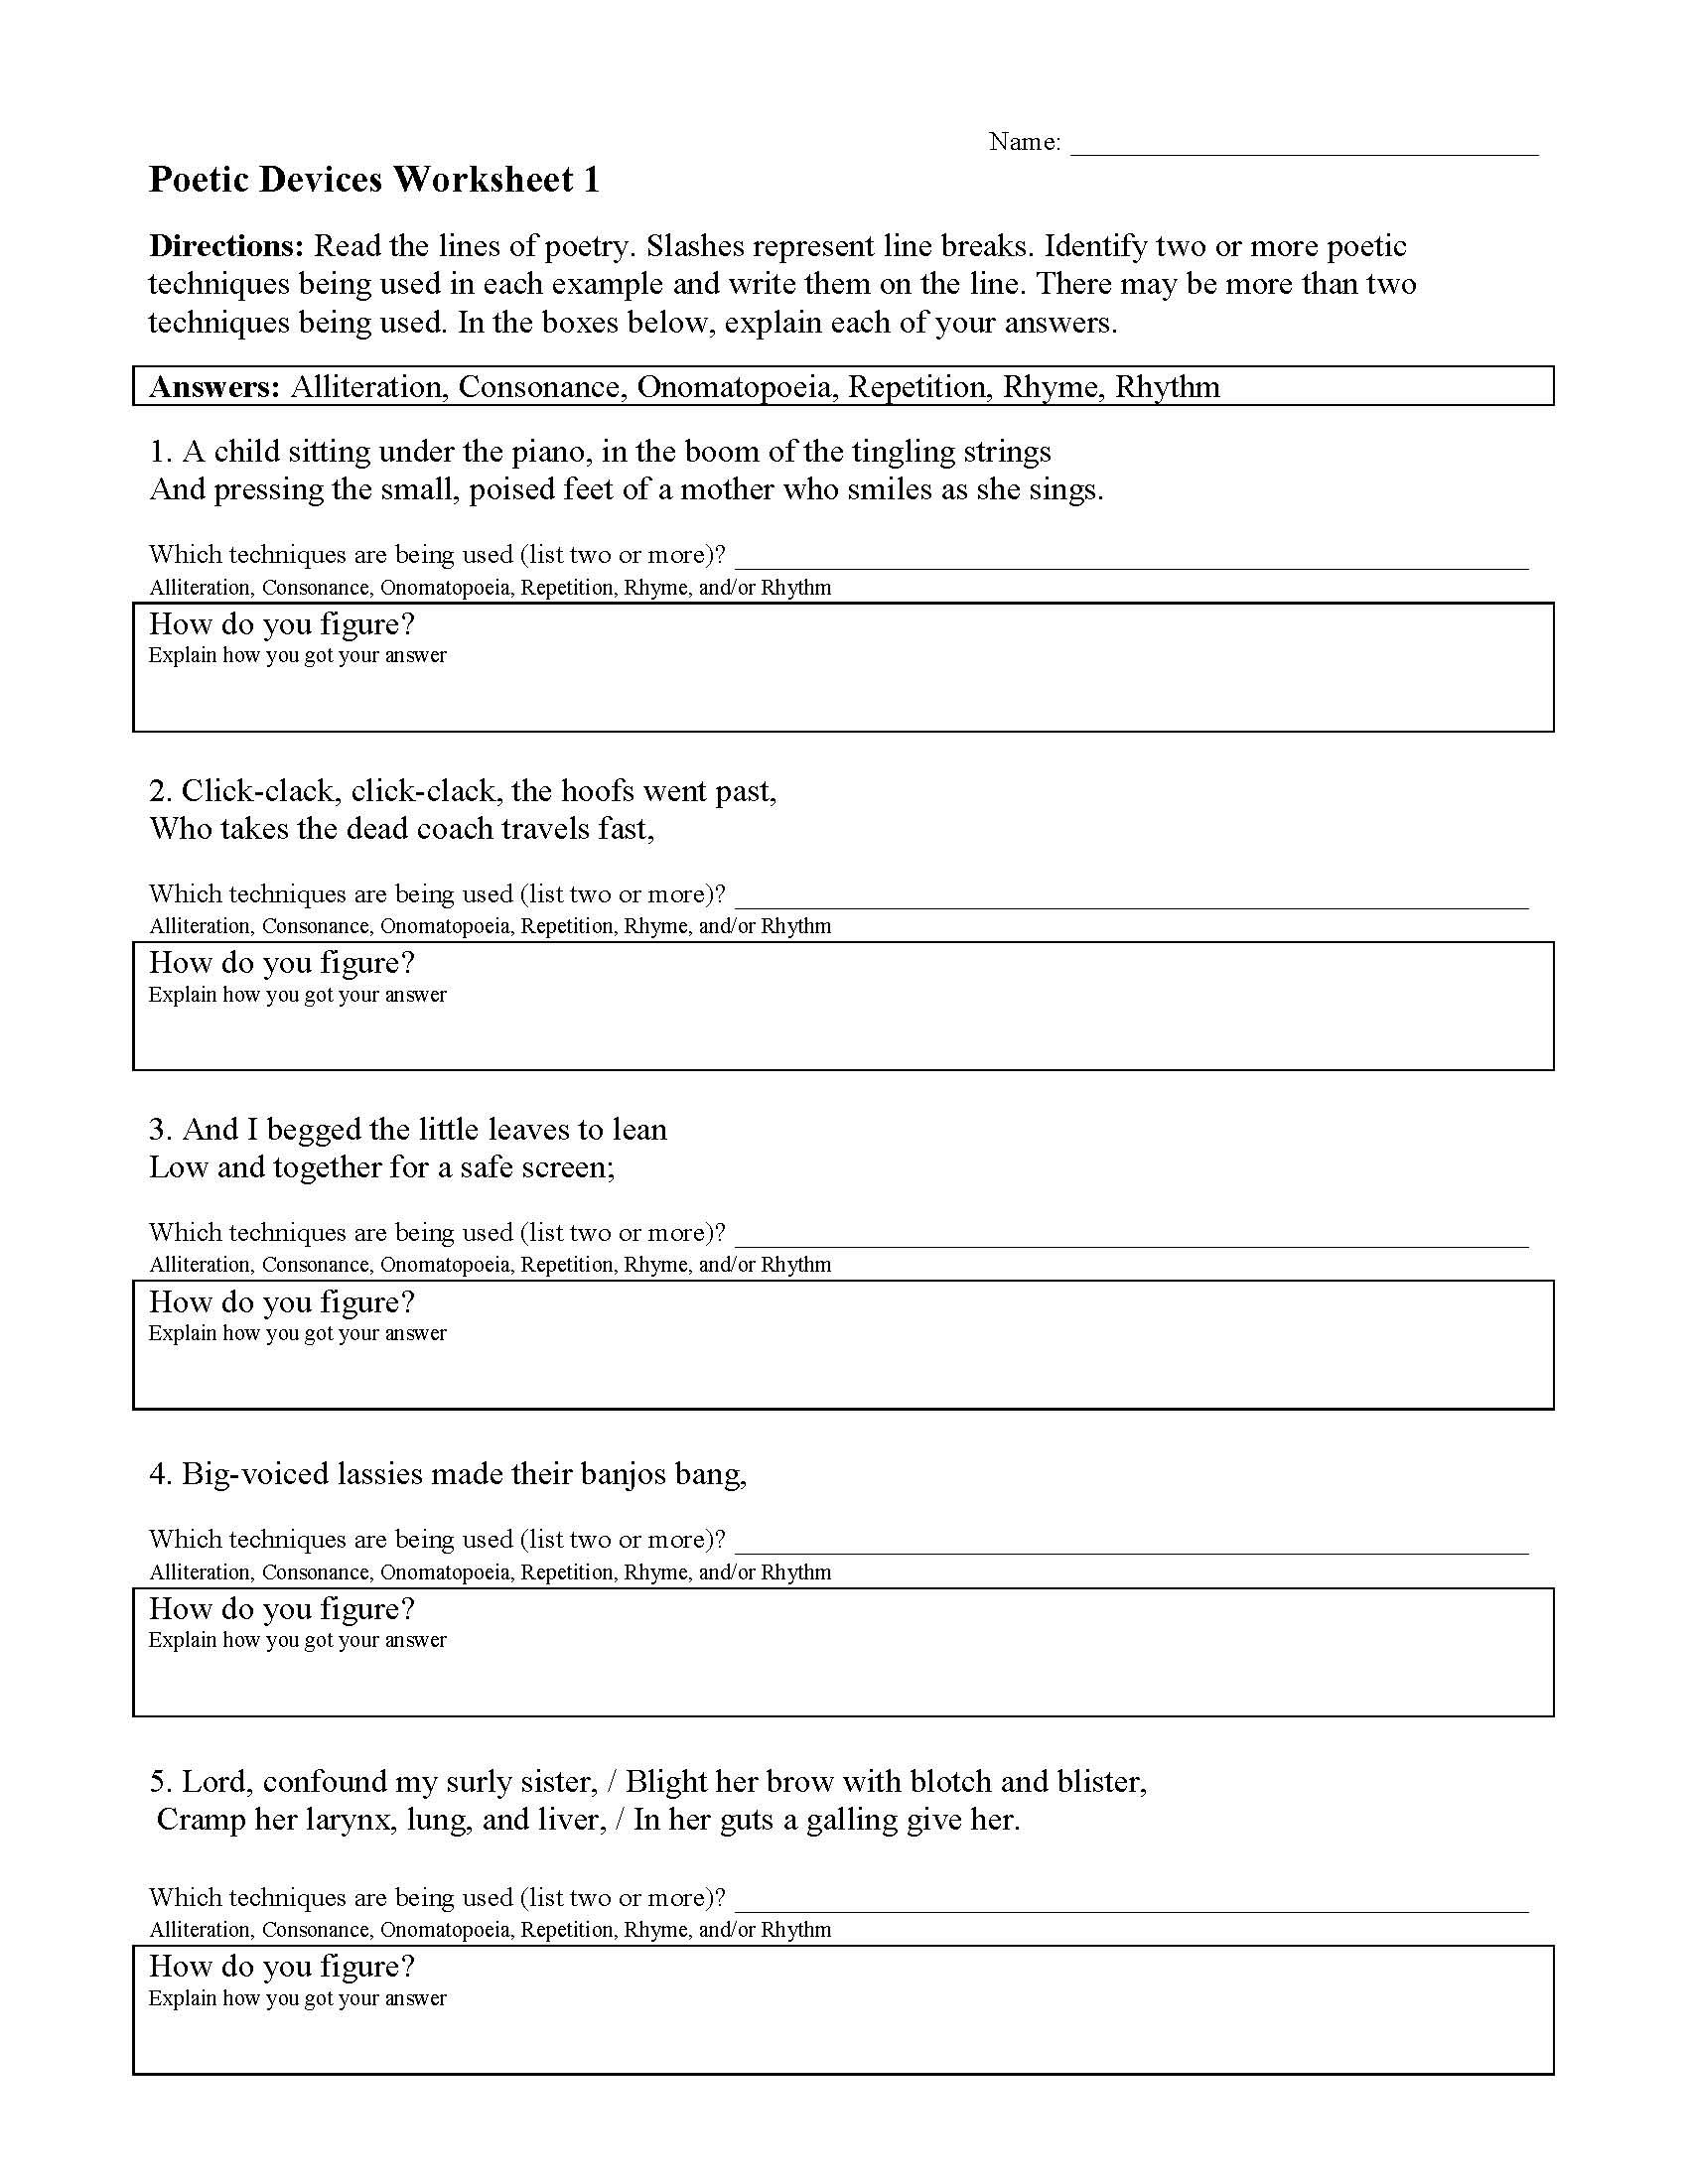 Poetic Devices Worksheet Answers